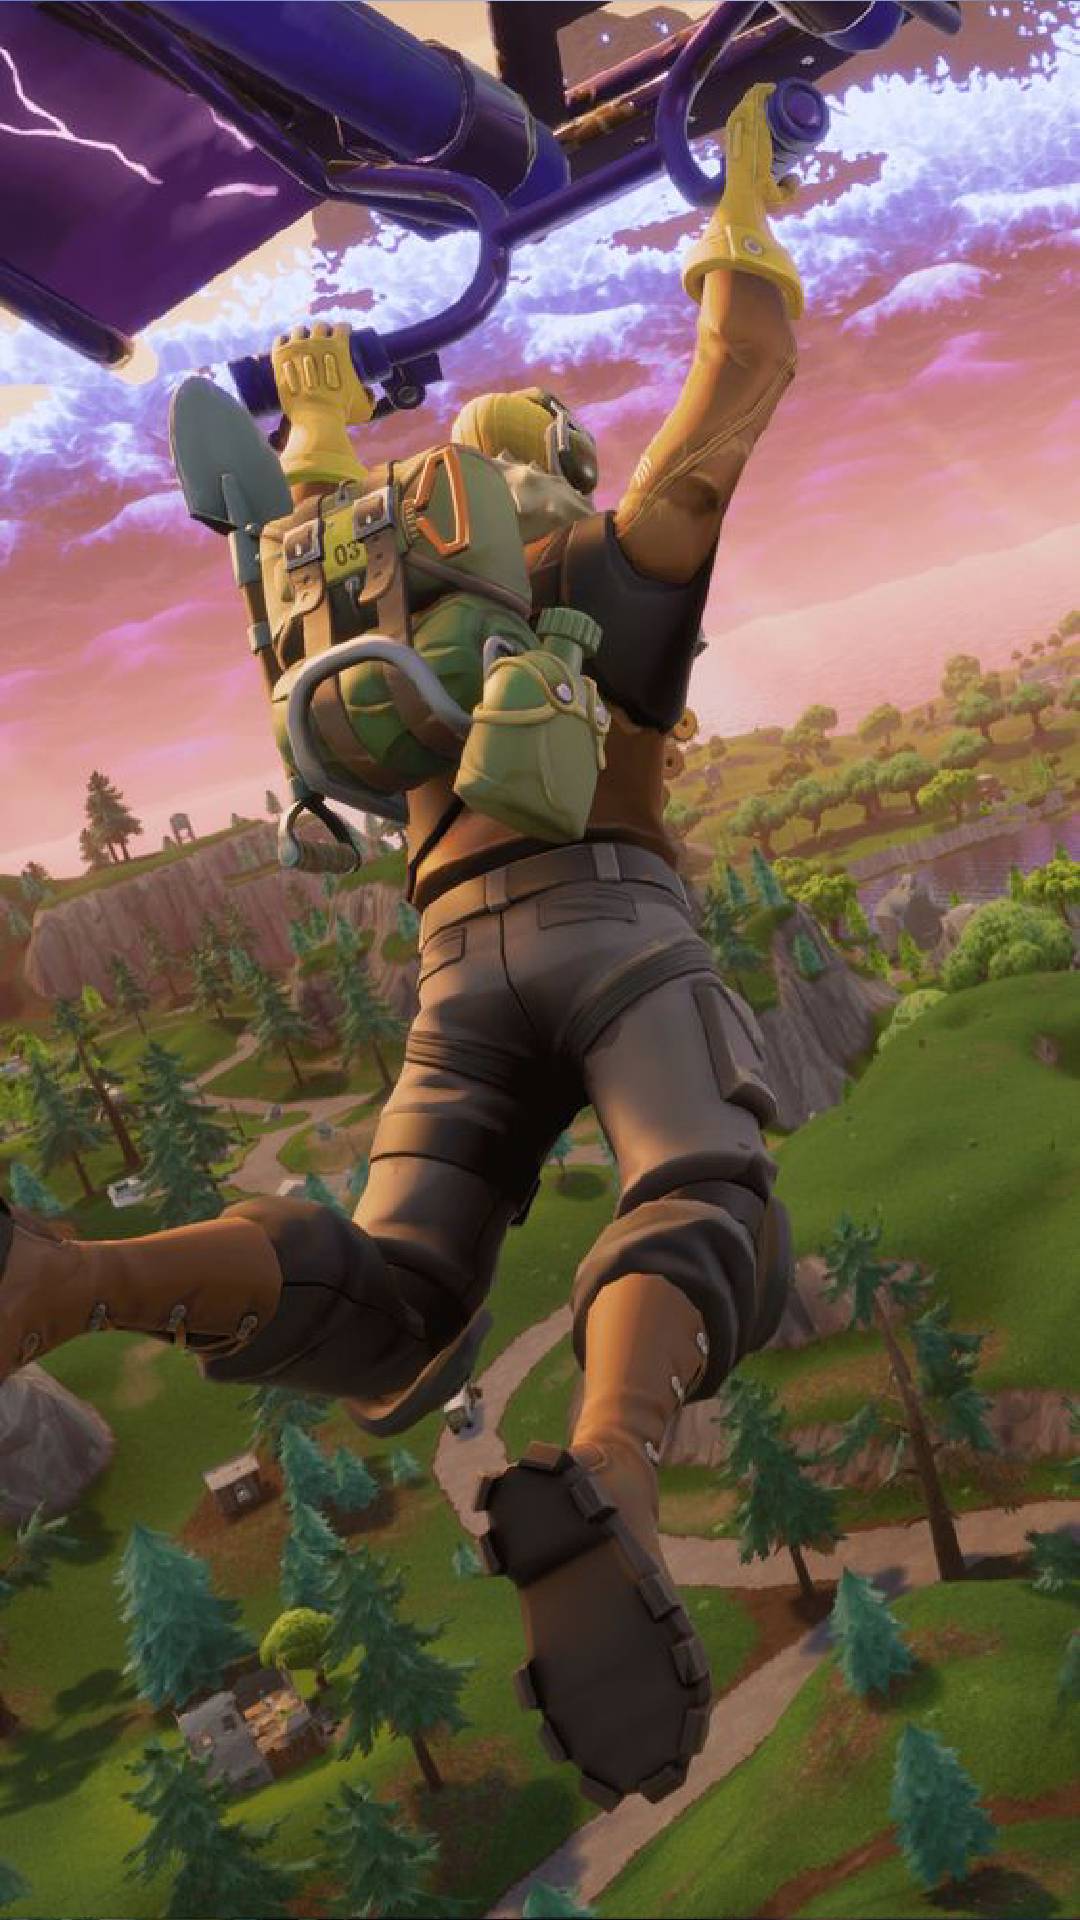 Fortnite wallpapers: a Fortnite character wearing tactical gear and a backpack floats down onto the island with a glider